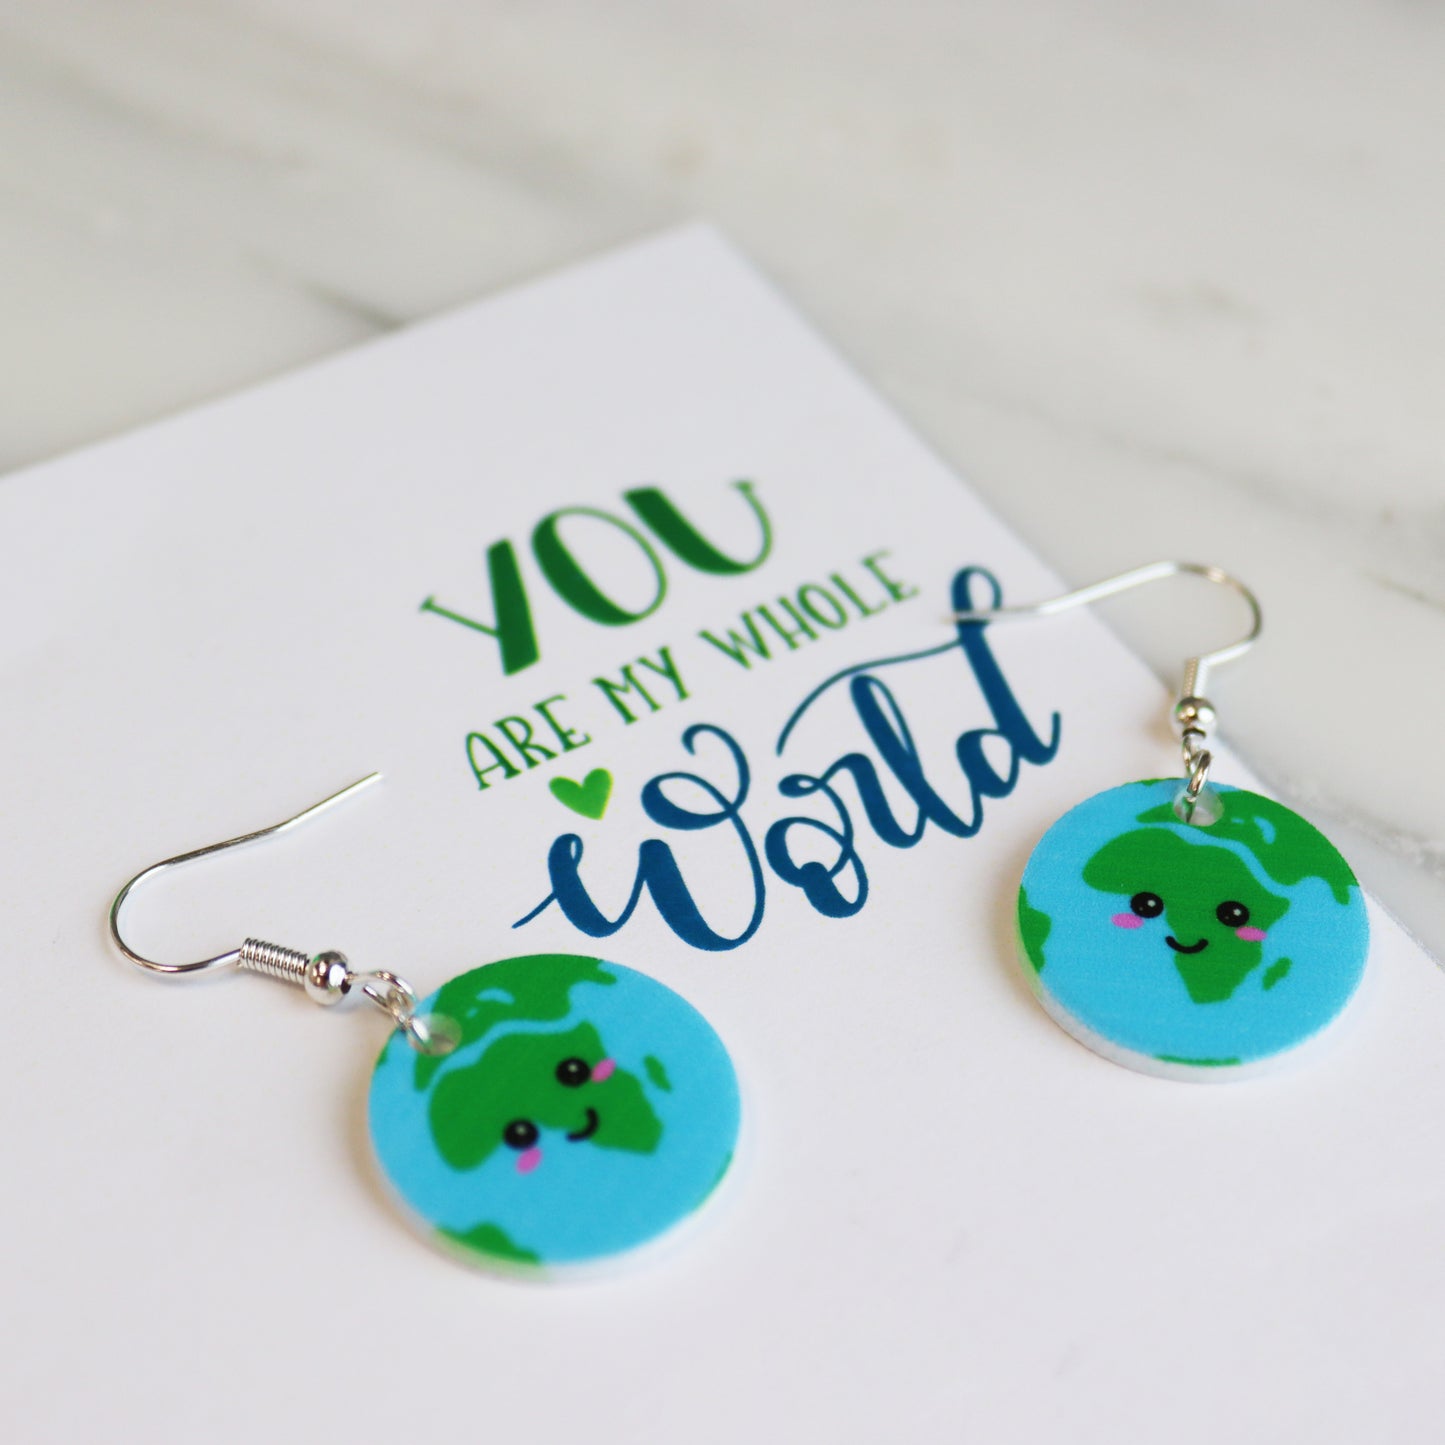 You are my whole world fun kawaii based earth earrings shown in white background